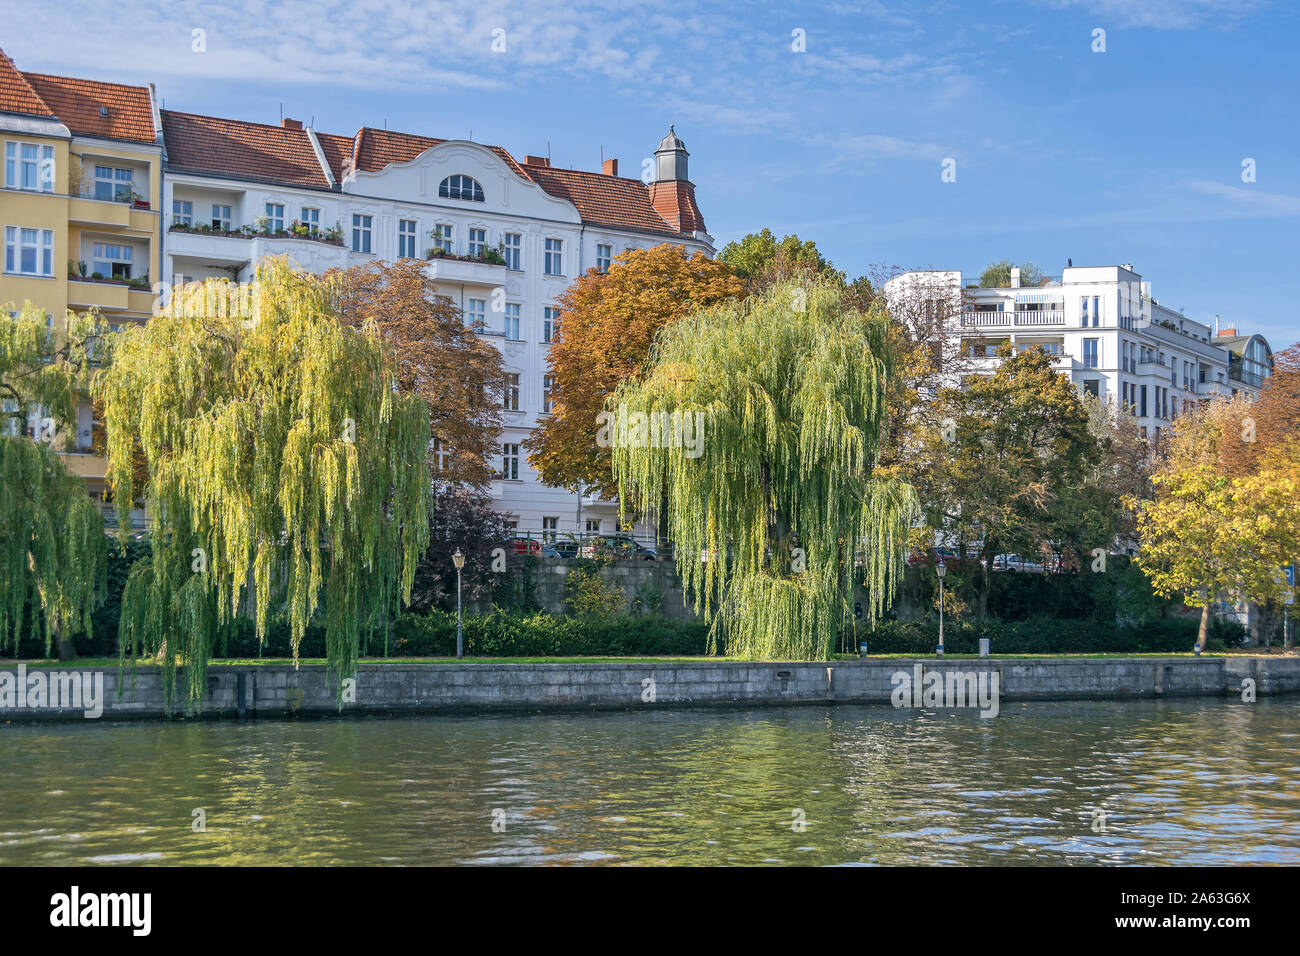 Berlin, Germany - October 14, 2019: Banks of the river Spree lined with weeping willow trees with typical for the district Westphalian quarter (german Stock Photo